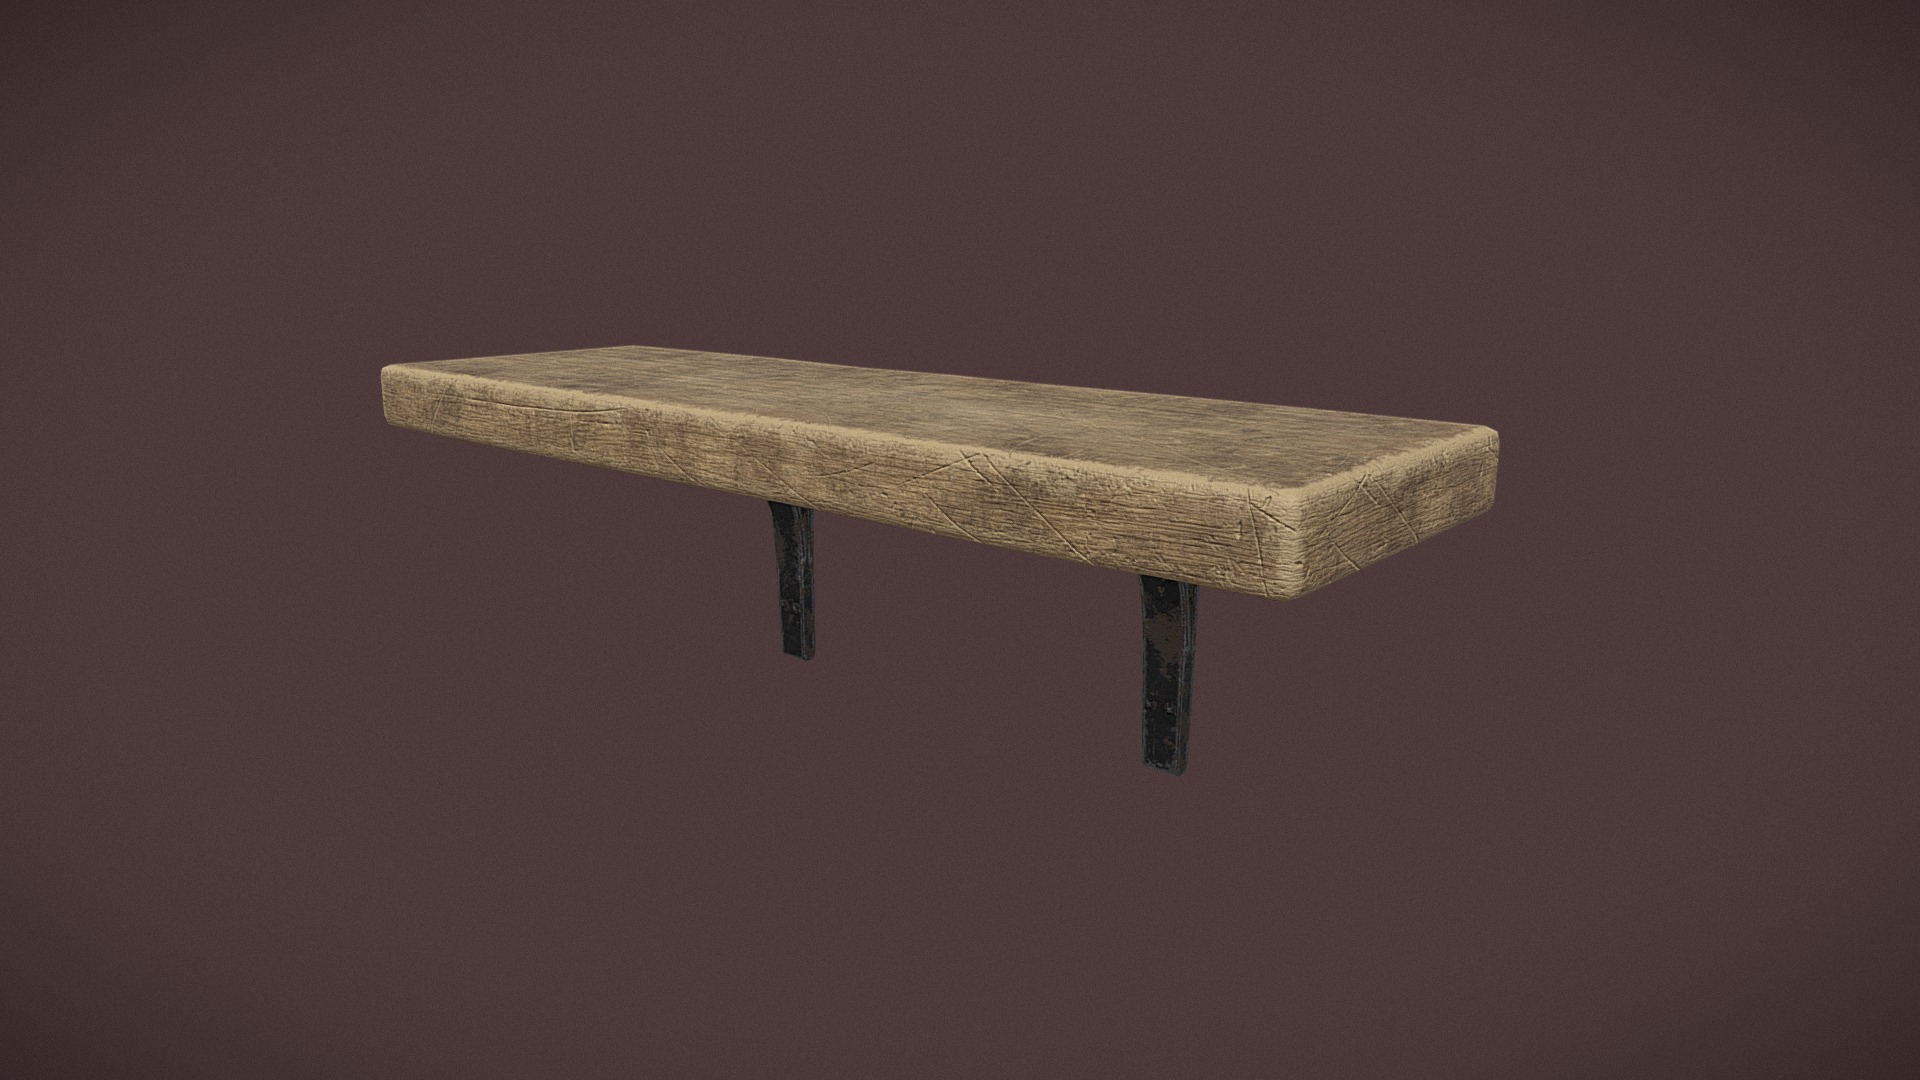 3D model Mini Shelf - This is a 3D model of the Mini Shelf. The 3D model is about a wooden table with a metal frame.